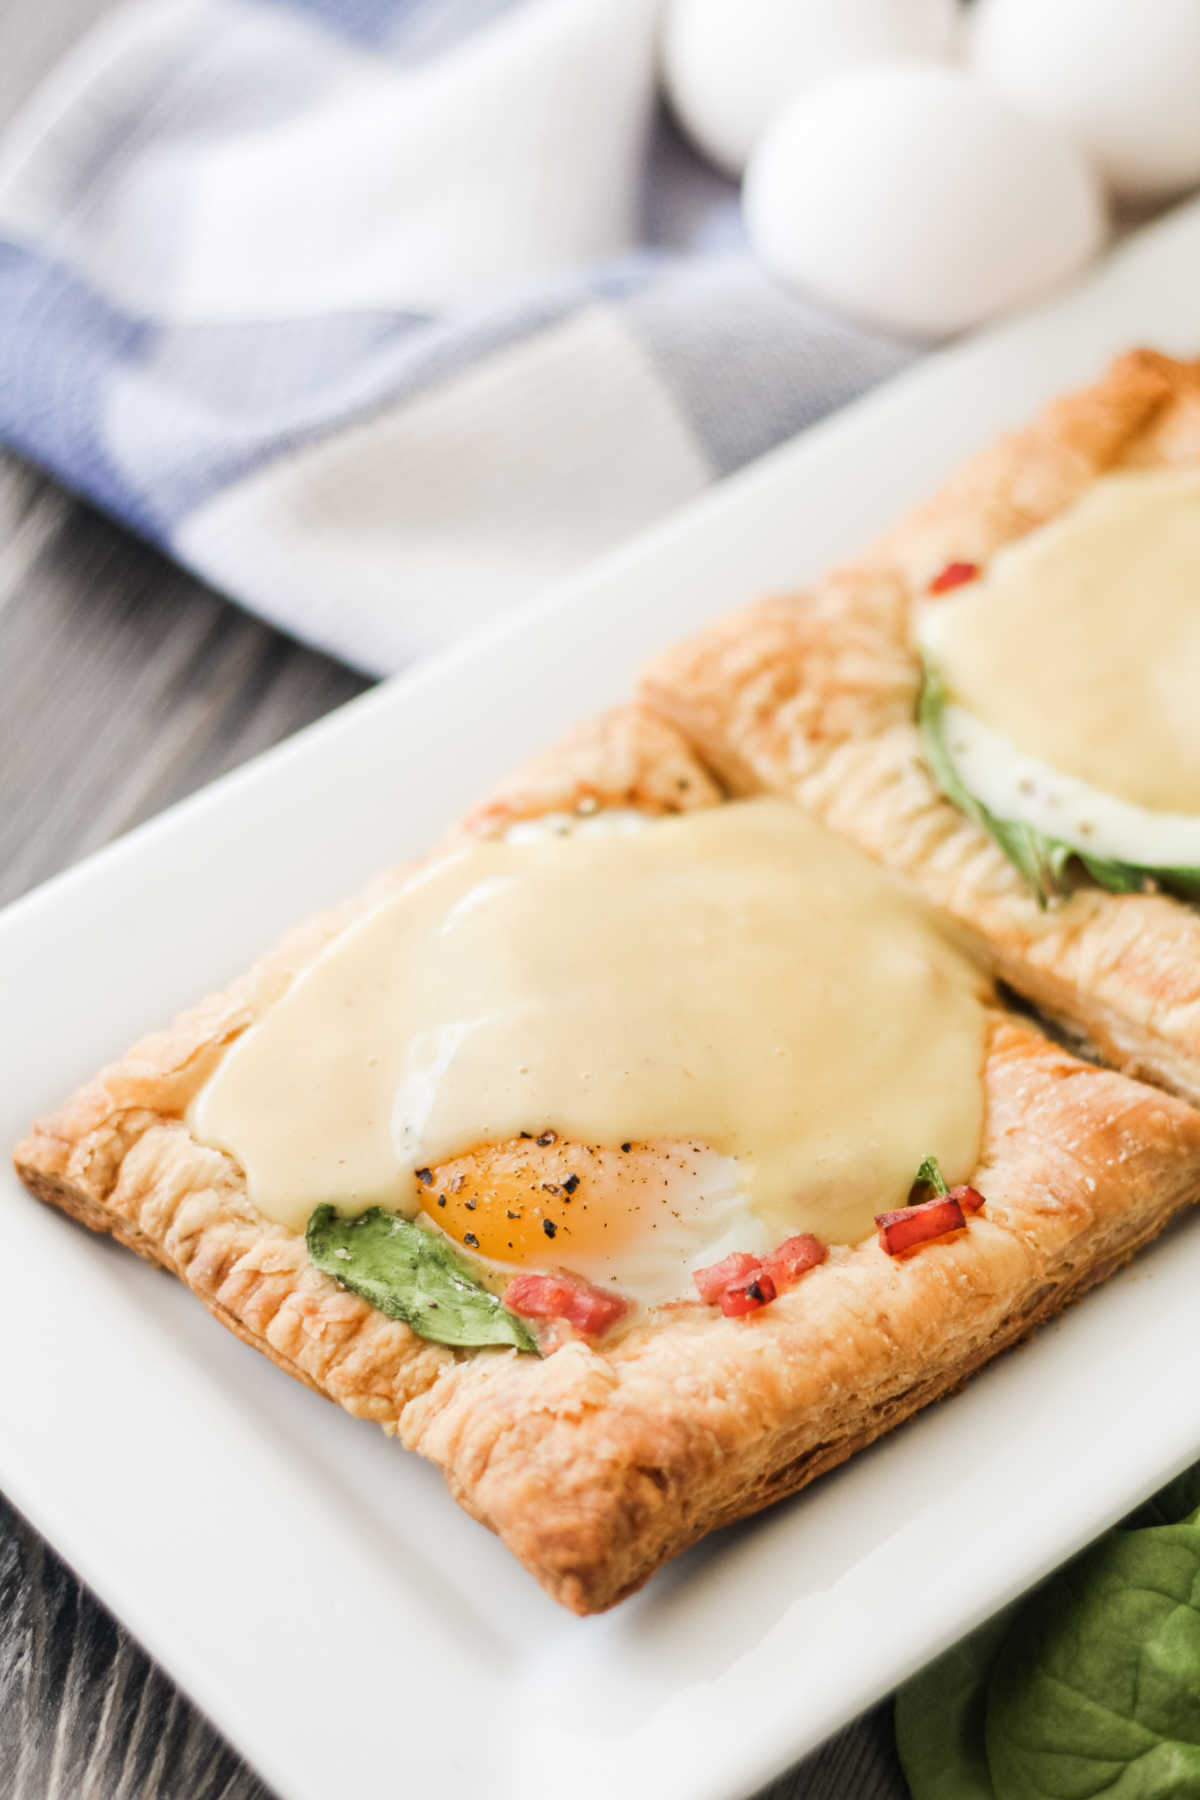 Puff pastry topped with ham, spinach, egg and hollandaise sauce.